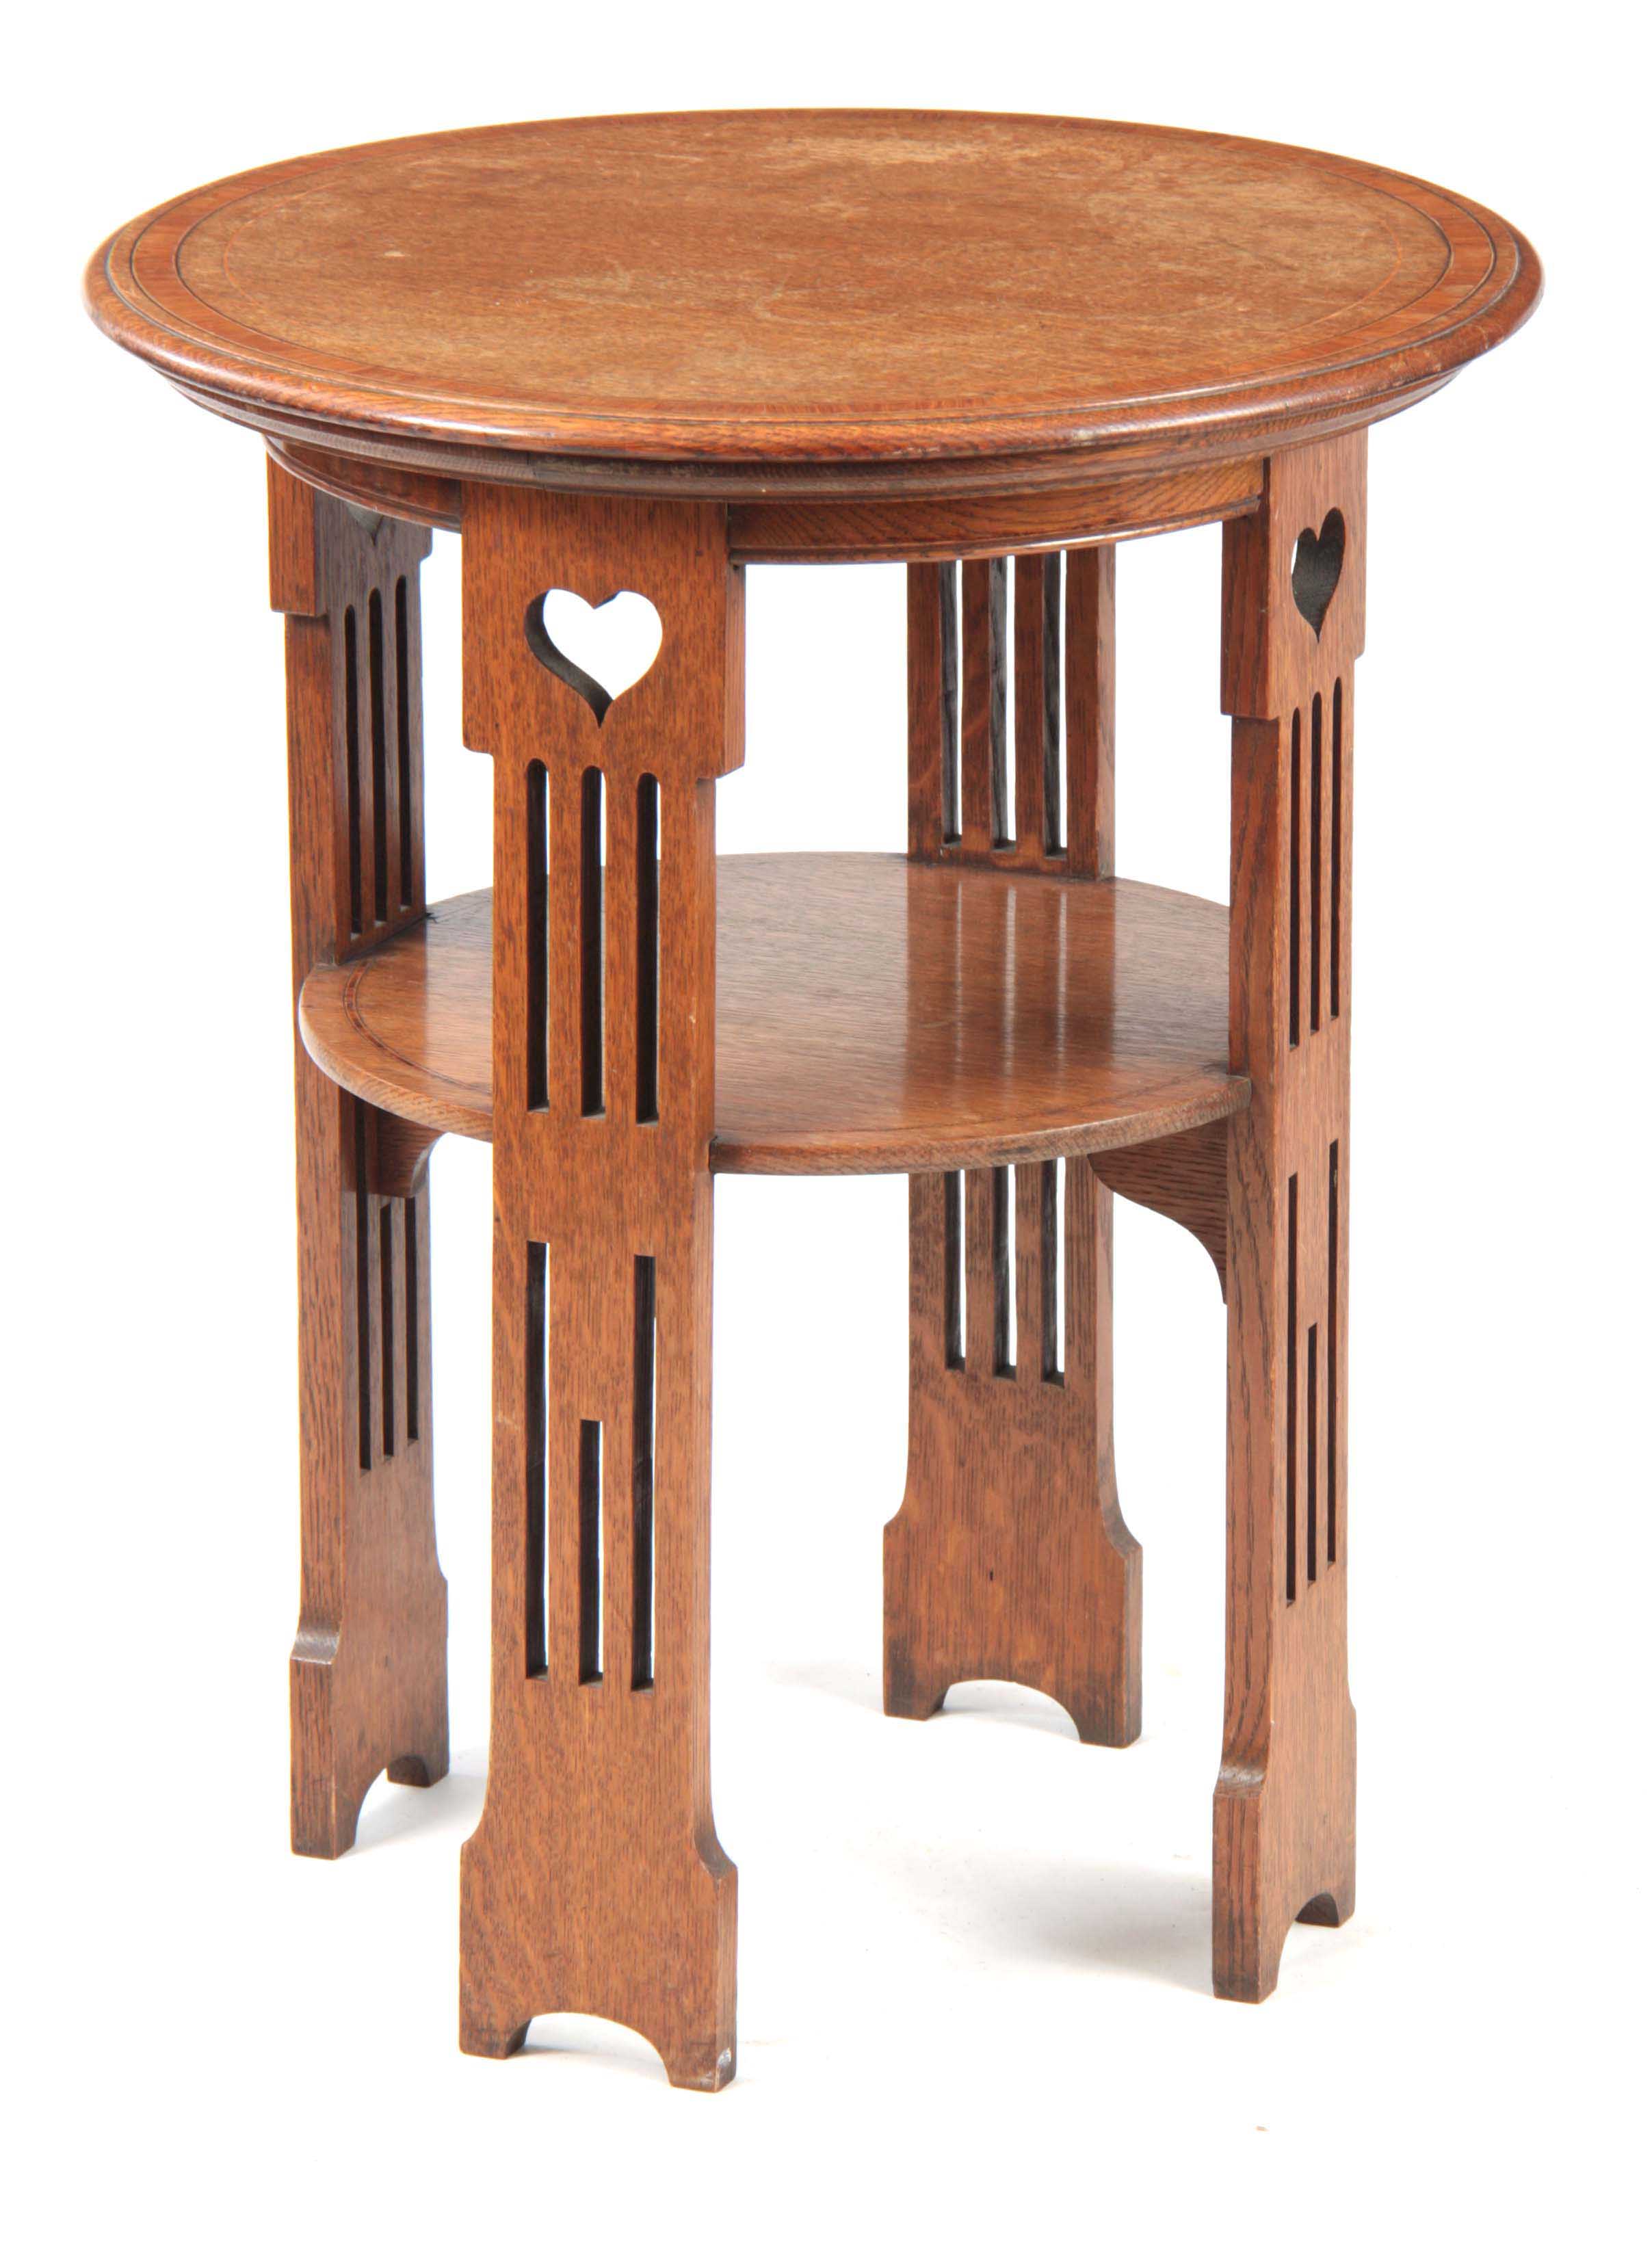 A LIBERTY STYLE ARTS AND CRAFTS OAK OCCASIONAL TABLE having a circular top with kingwood